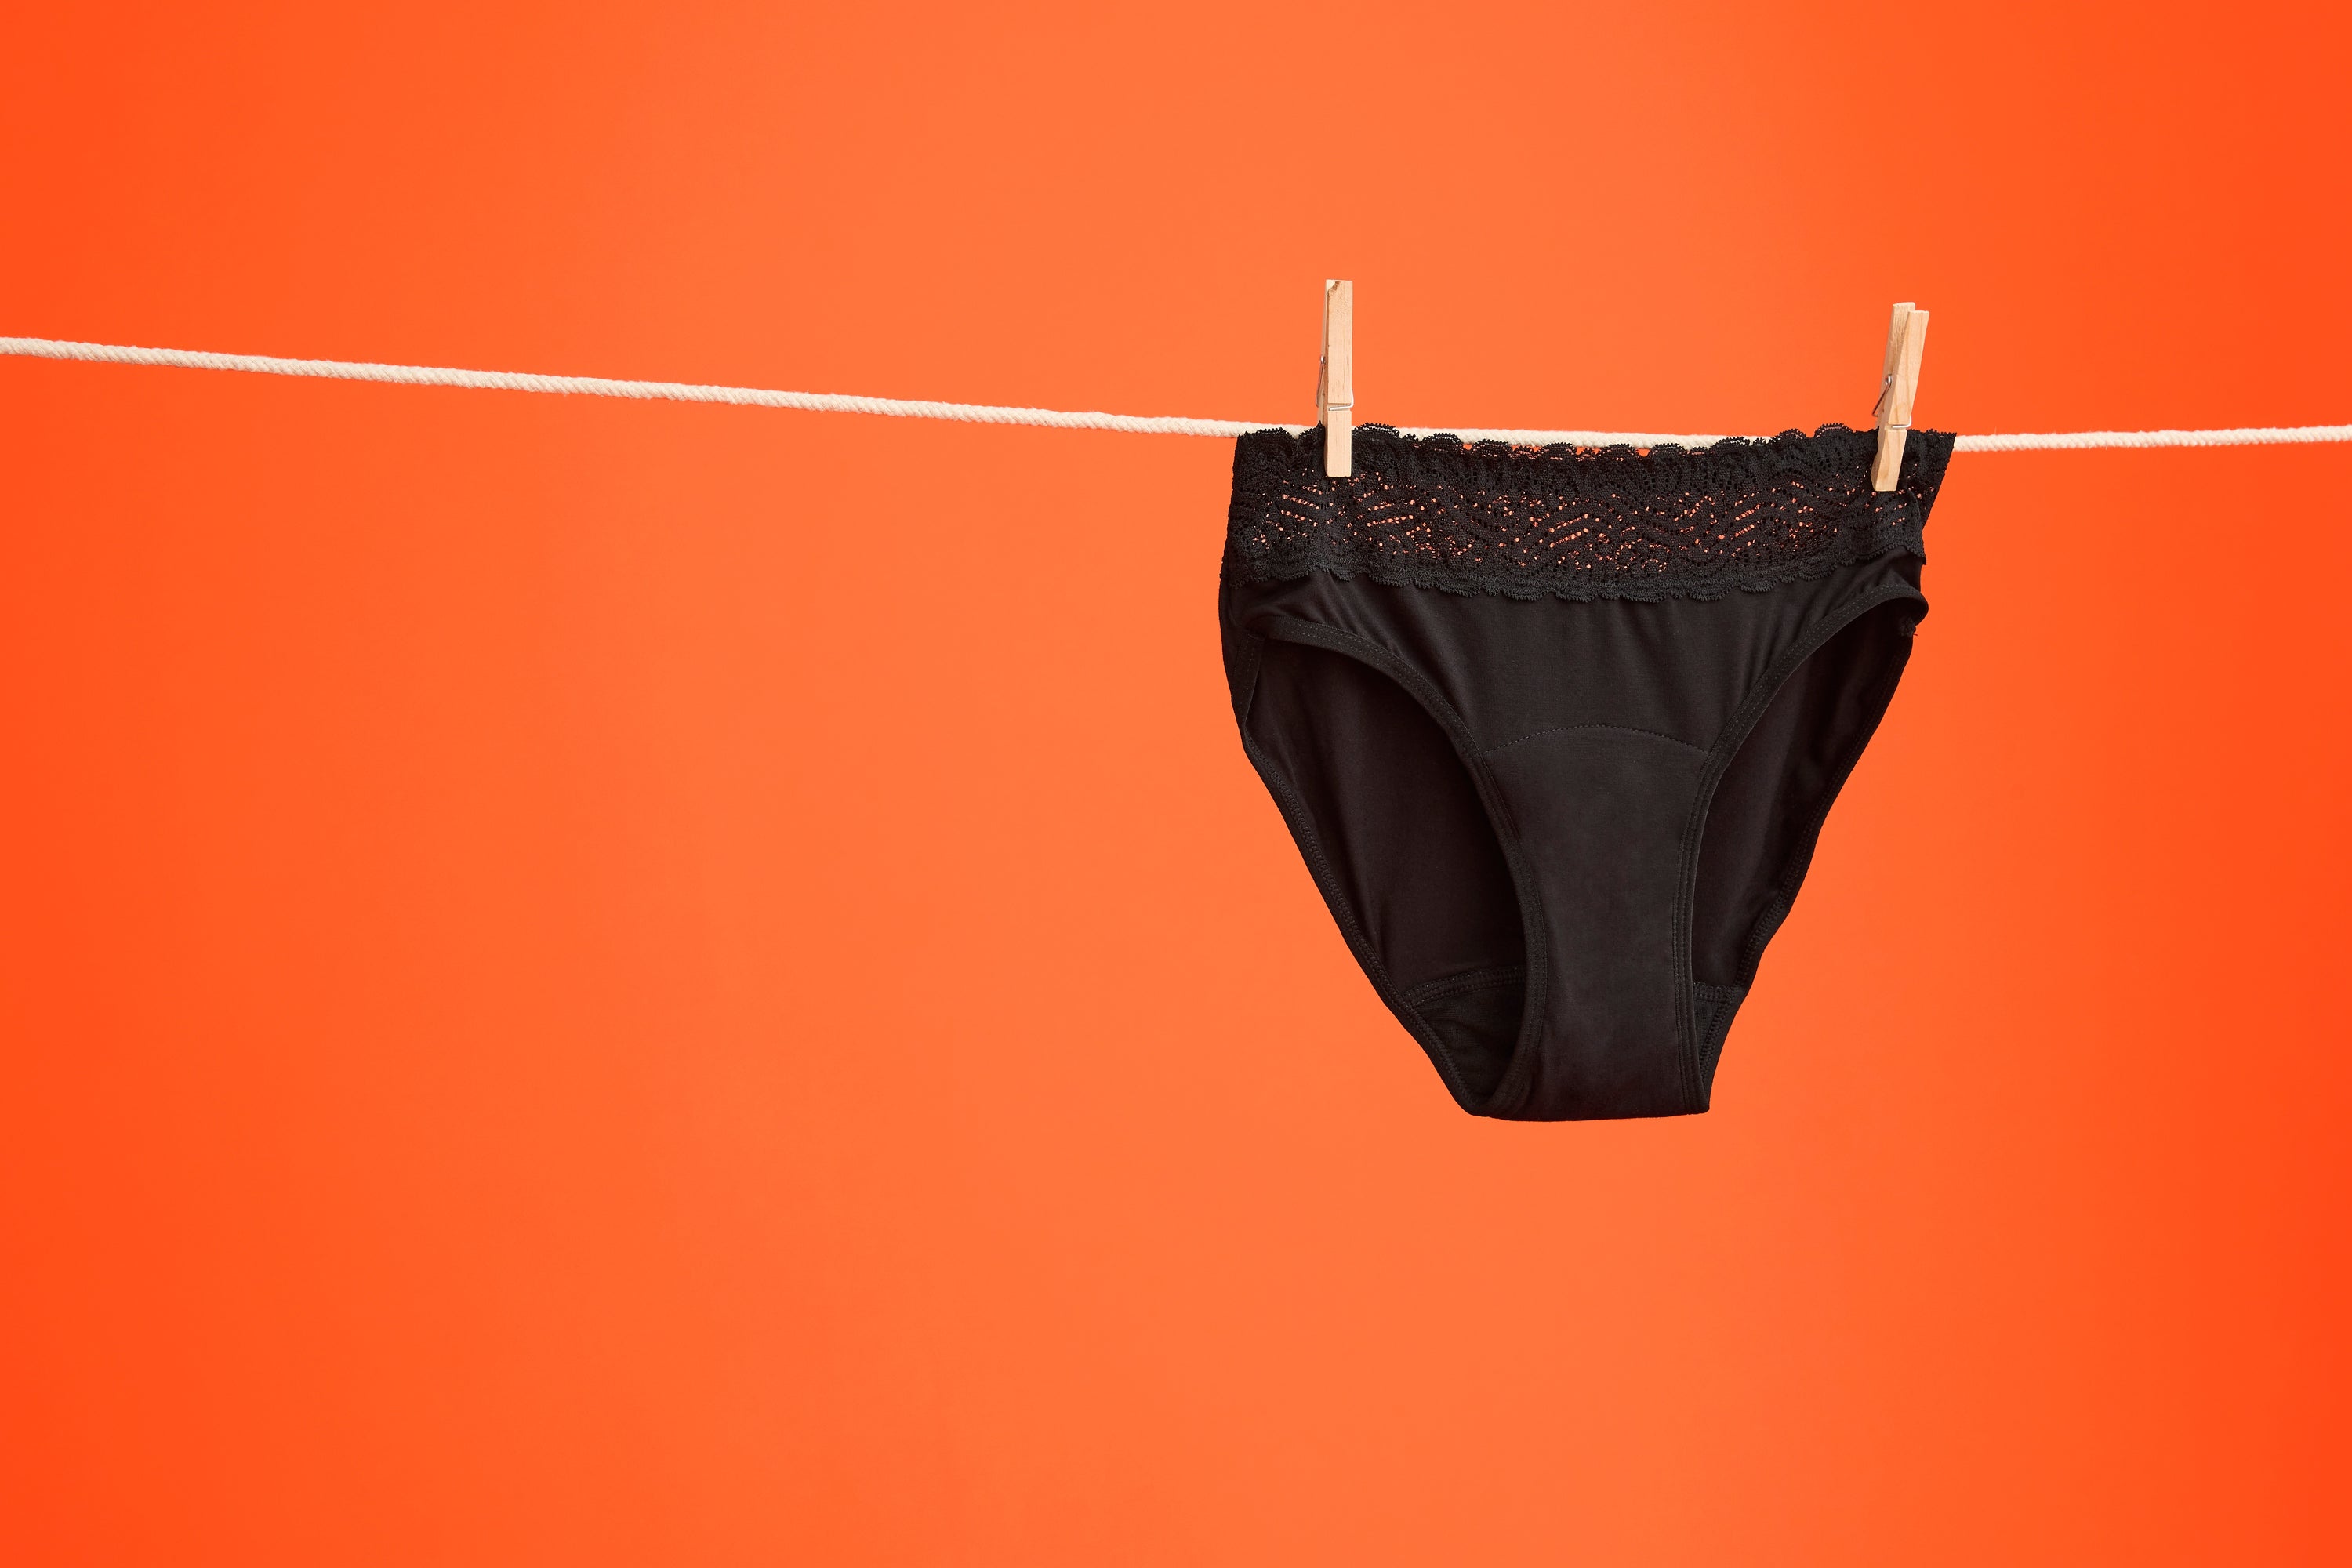 This New-to-Market Underwear Is Both Stylish & Leak-Proof